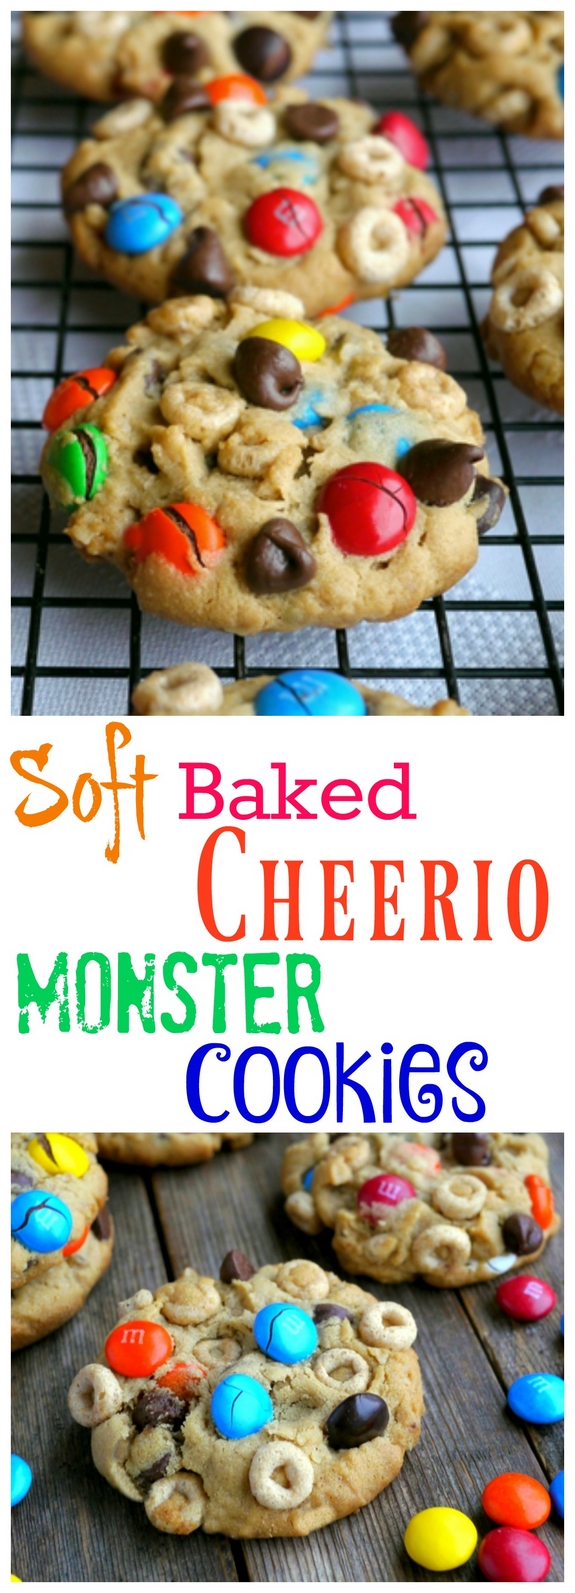 Soft Baked Cheerio Monster Cookies need to be made soon